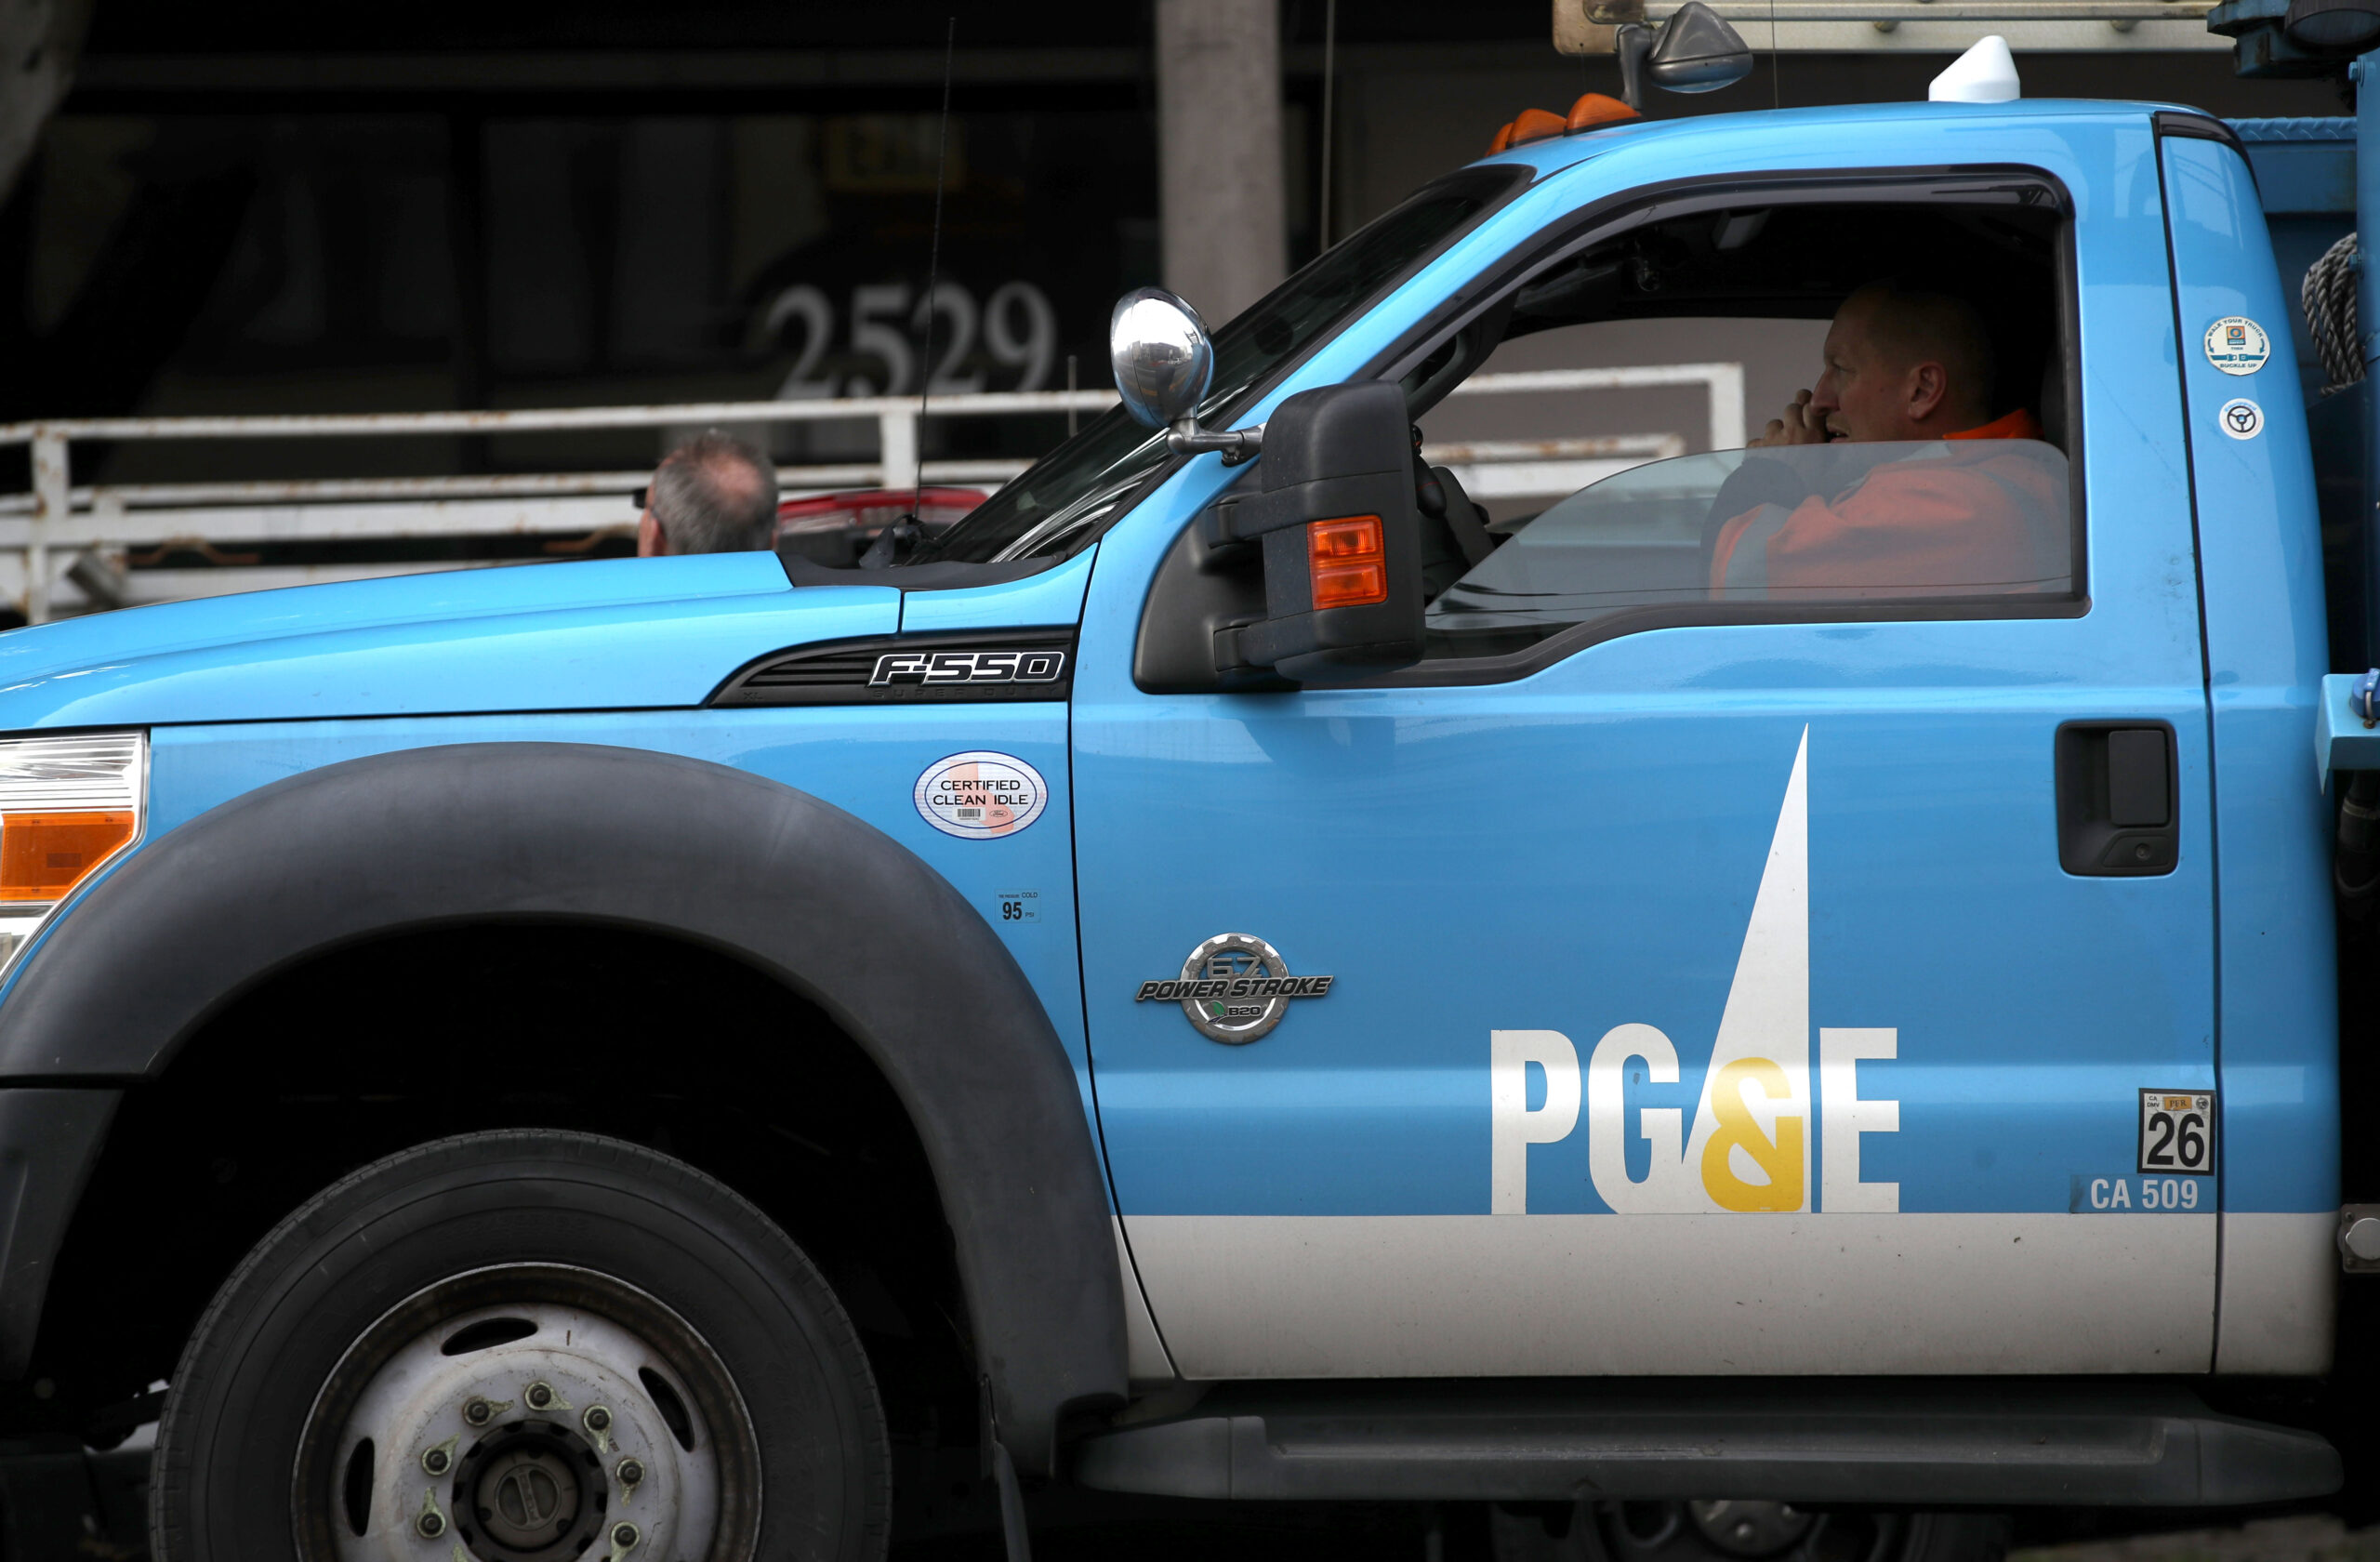 Eye-Popping PG&E Bills Roll In as Gas Prices Spike